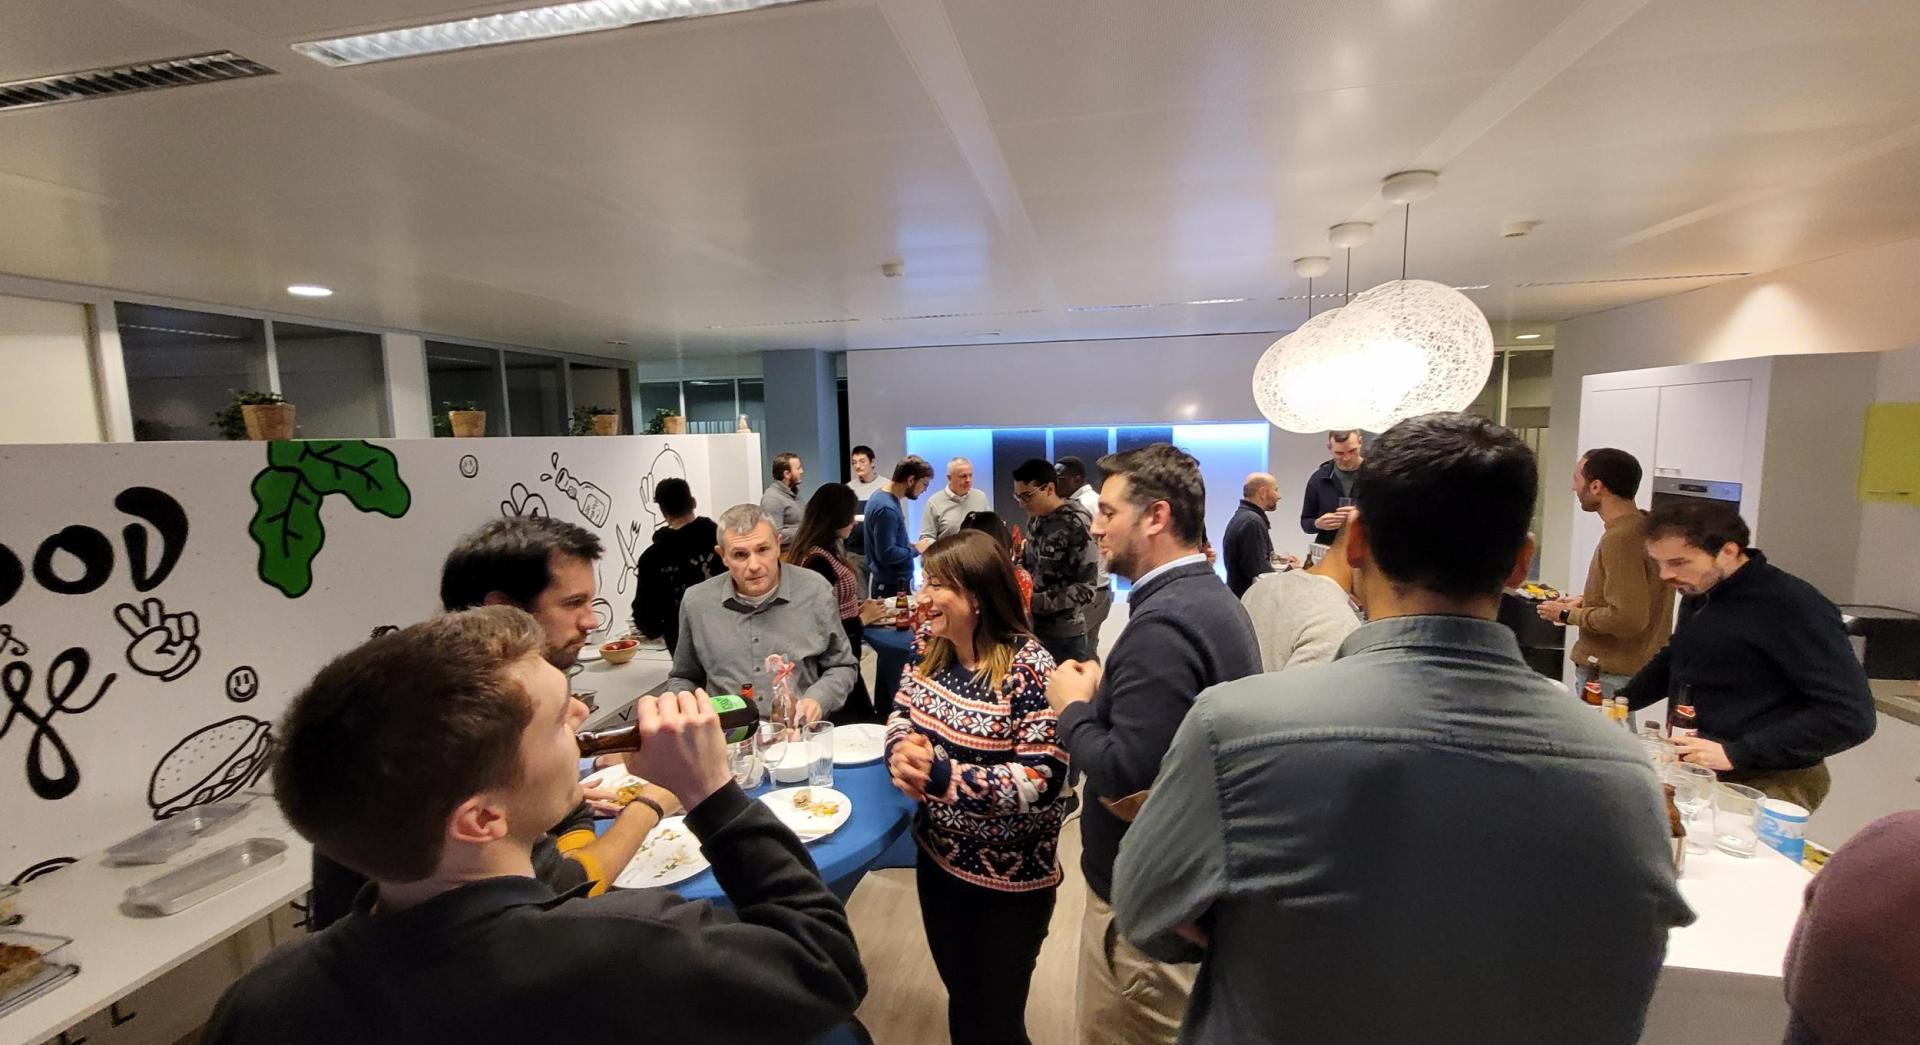 About our Christmas Afterwork